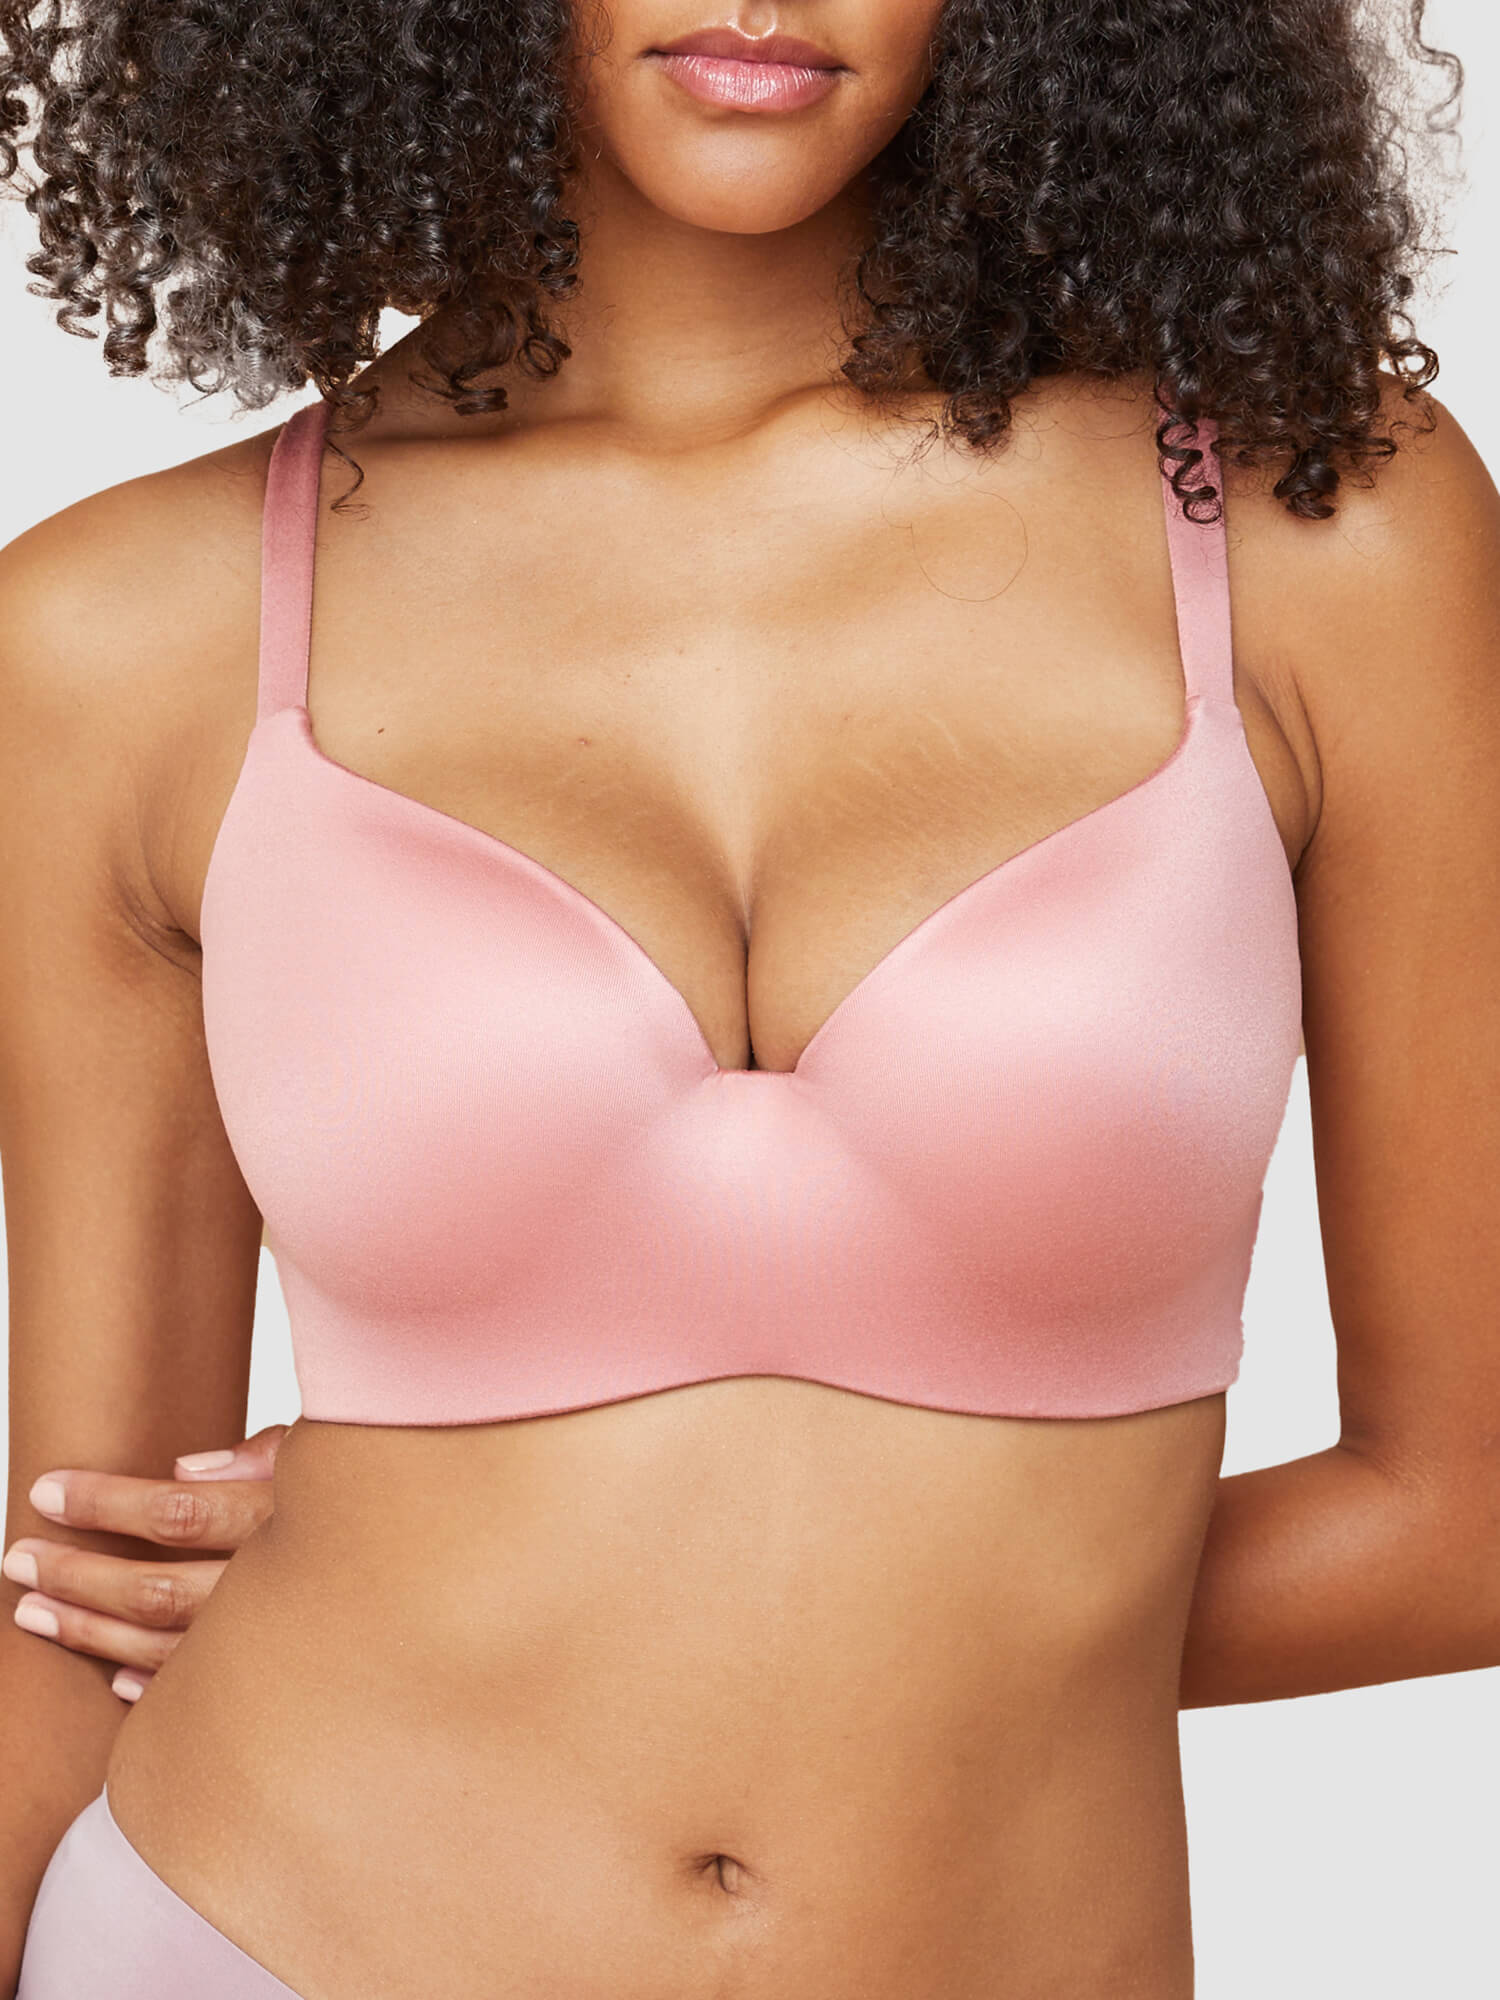 Lingerie For Big Boobs, Supportive D+ Bras